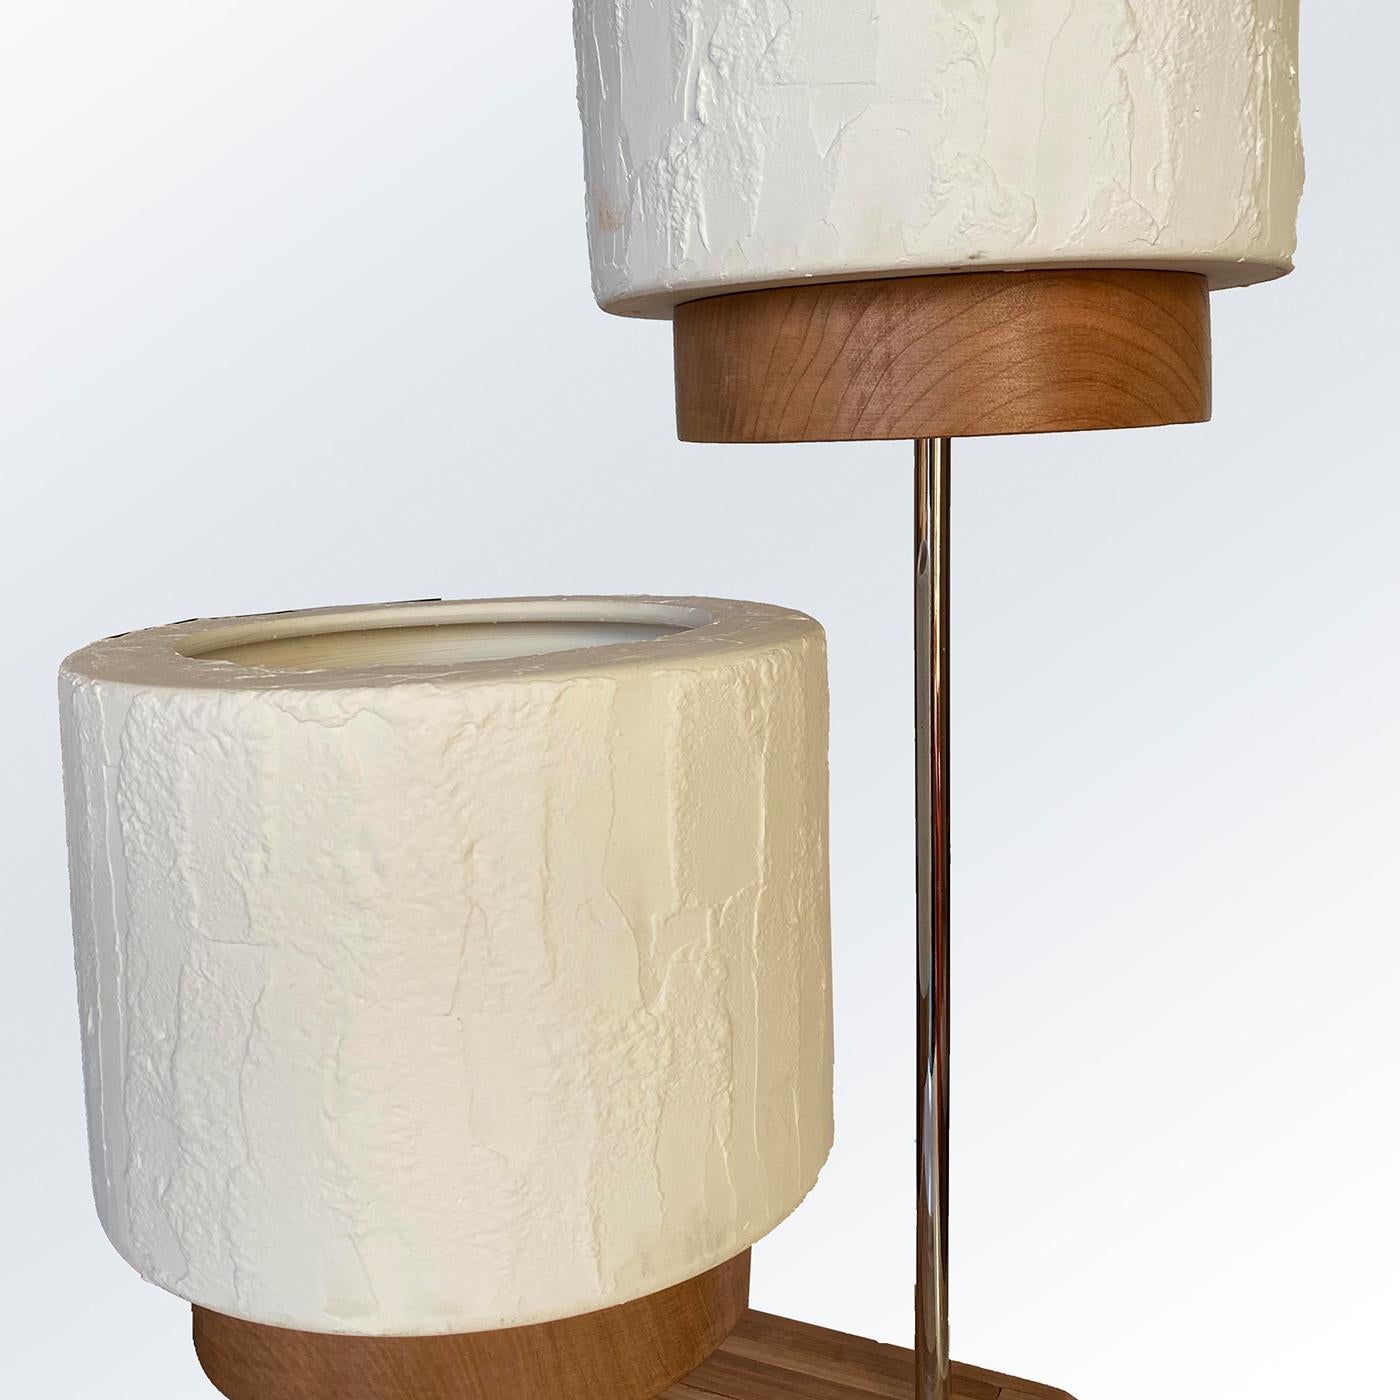 This sophisticated two-light table lamp couples a distinct sculptural flair with a striking illumination potential. Two thin metal rods in different heights connect the base in solid cherry marked by a ridged texture to the shading units, which are